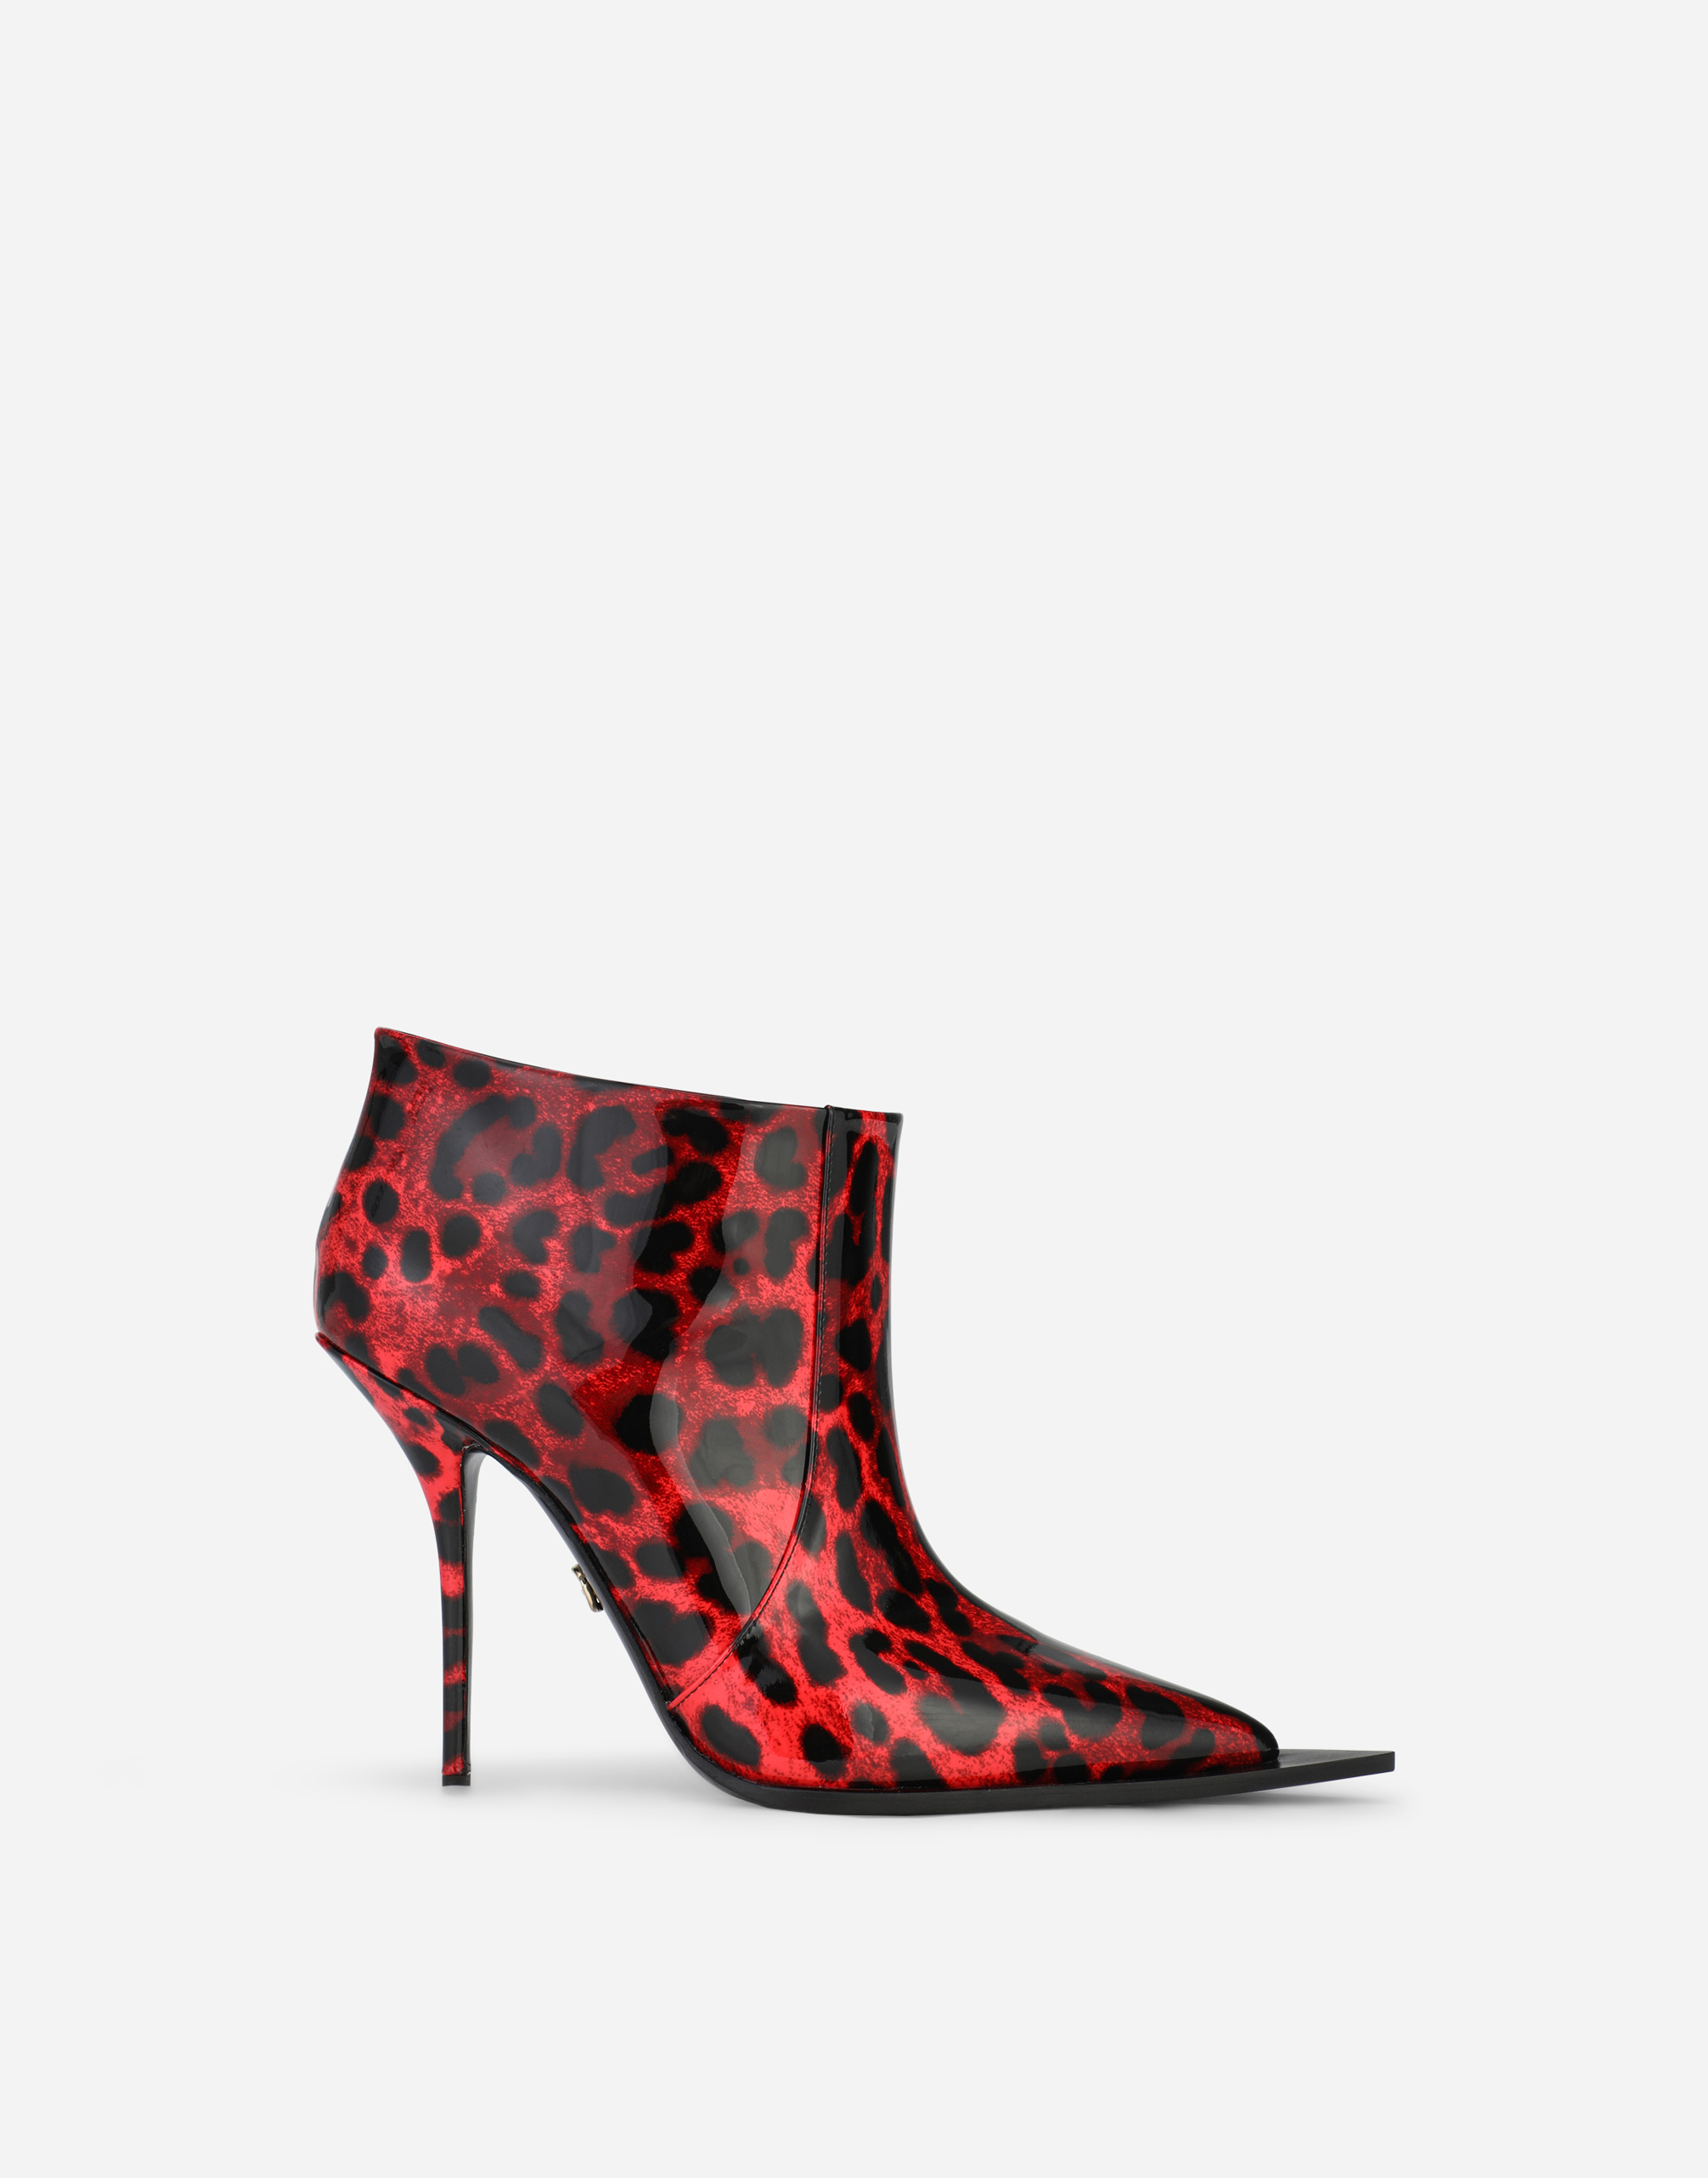 Ankle boots in red leopard-print patent leather in Multicolor